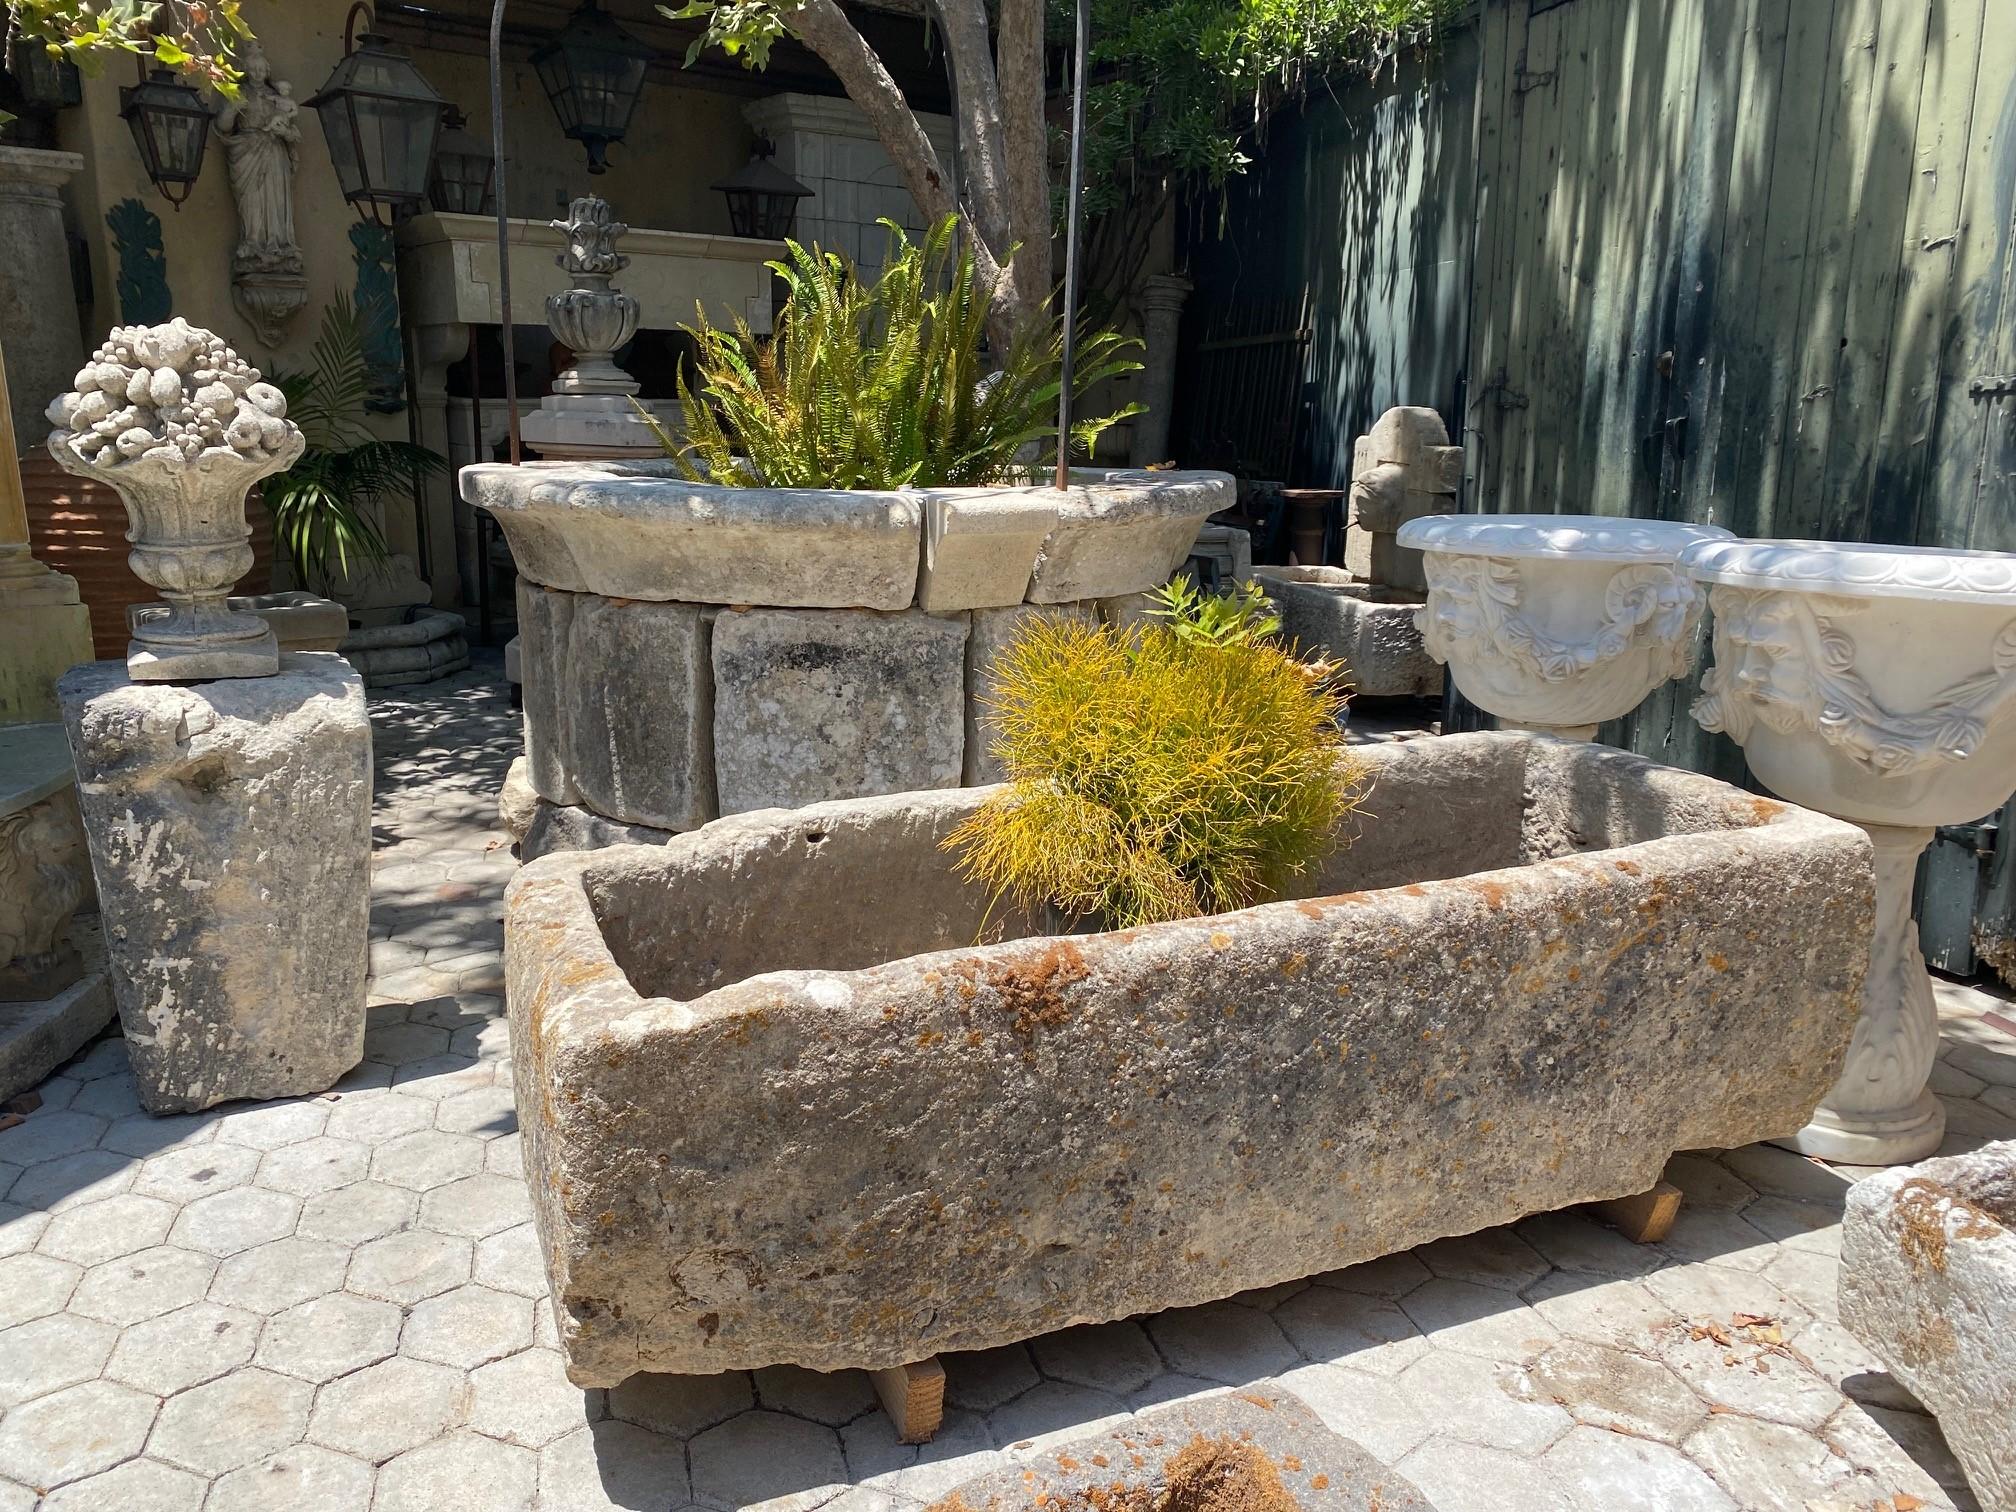 Hand Carved Stone Container Fountain Basin Tub Planter Firepit Trough Antique LA . Exquisite 17th 18th century water fountain basin of hand carved stone . This trough could be installed with a simple bronze spout or a carved stone fountain head , we